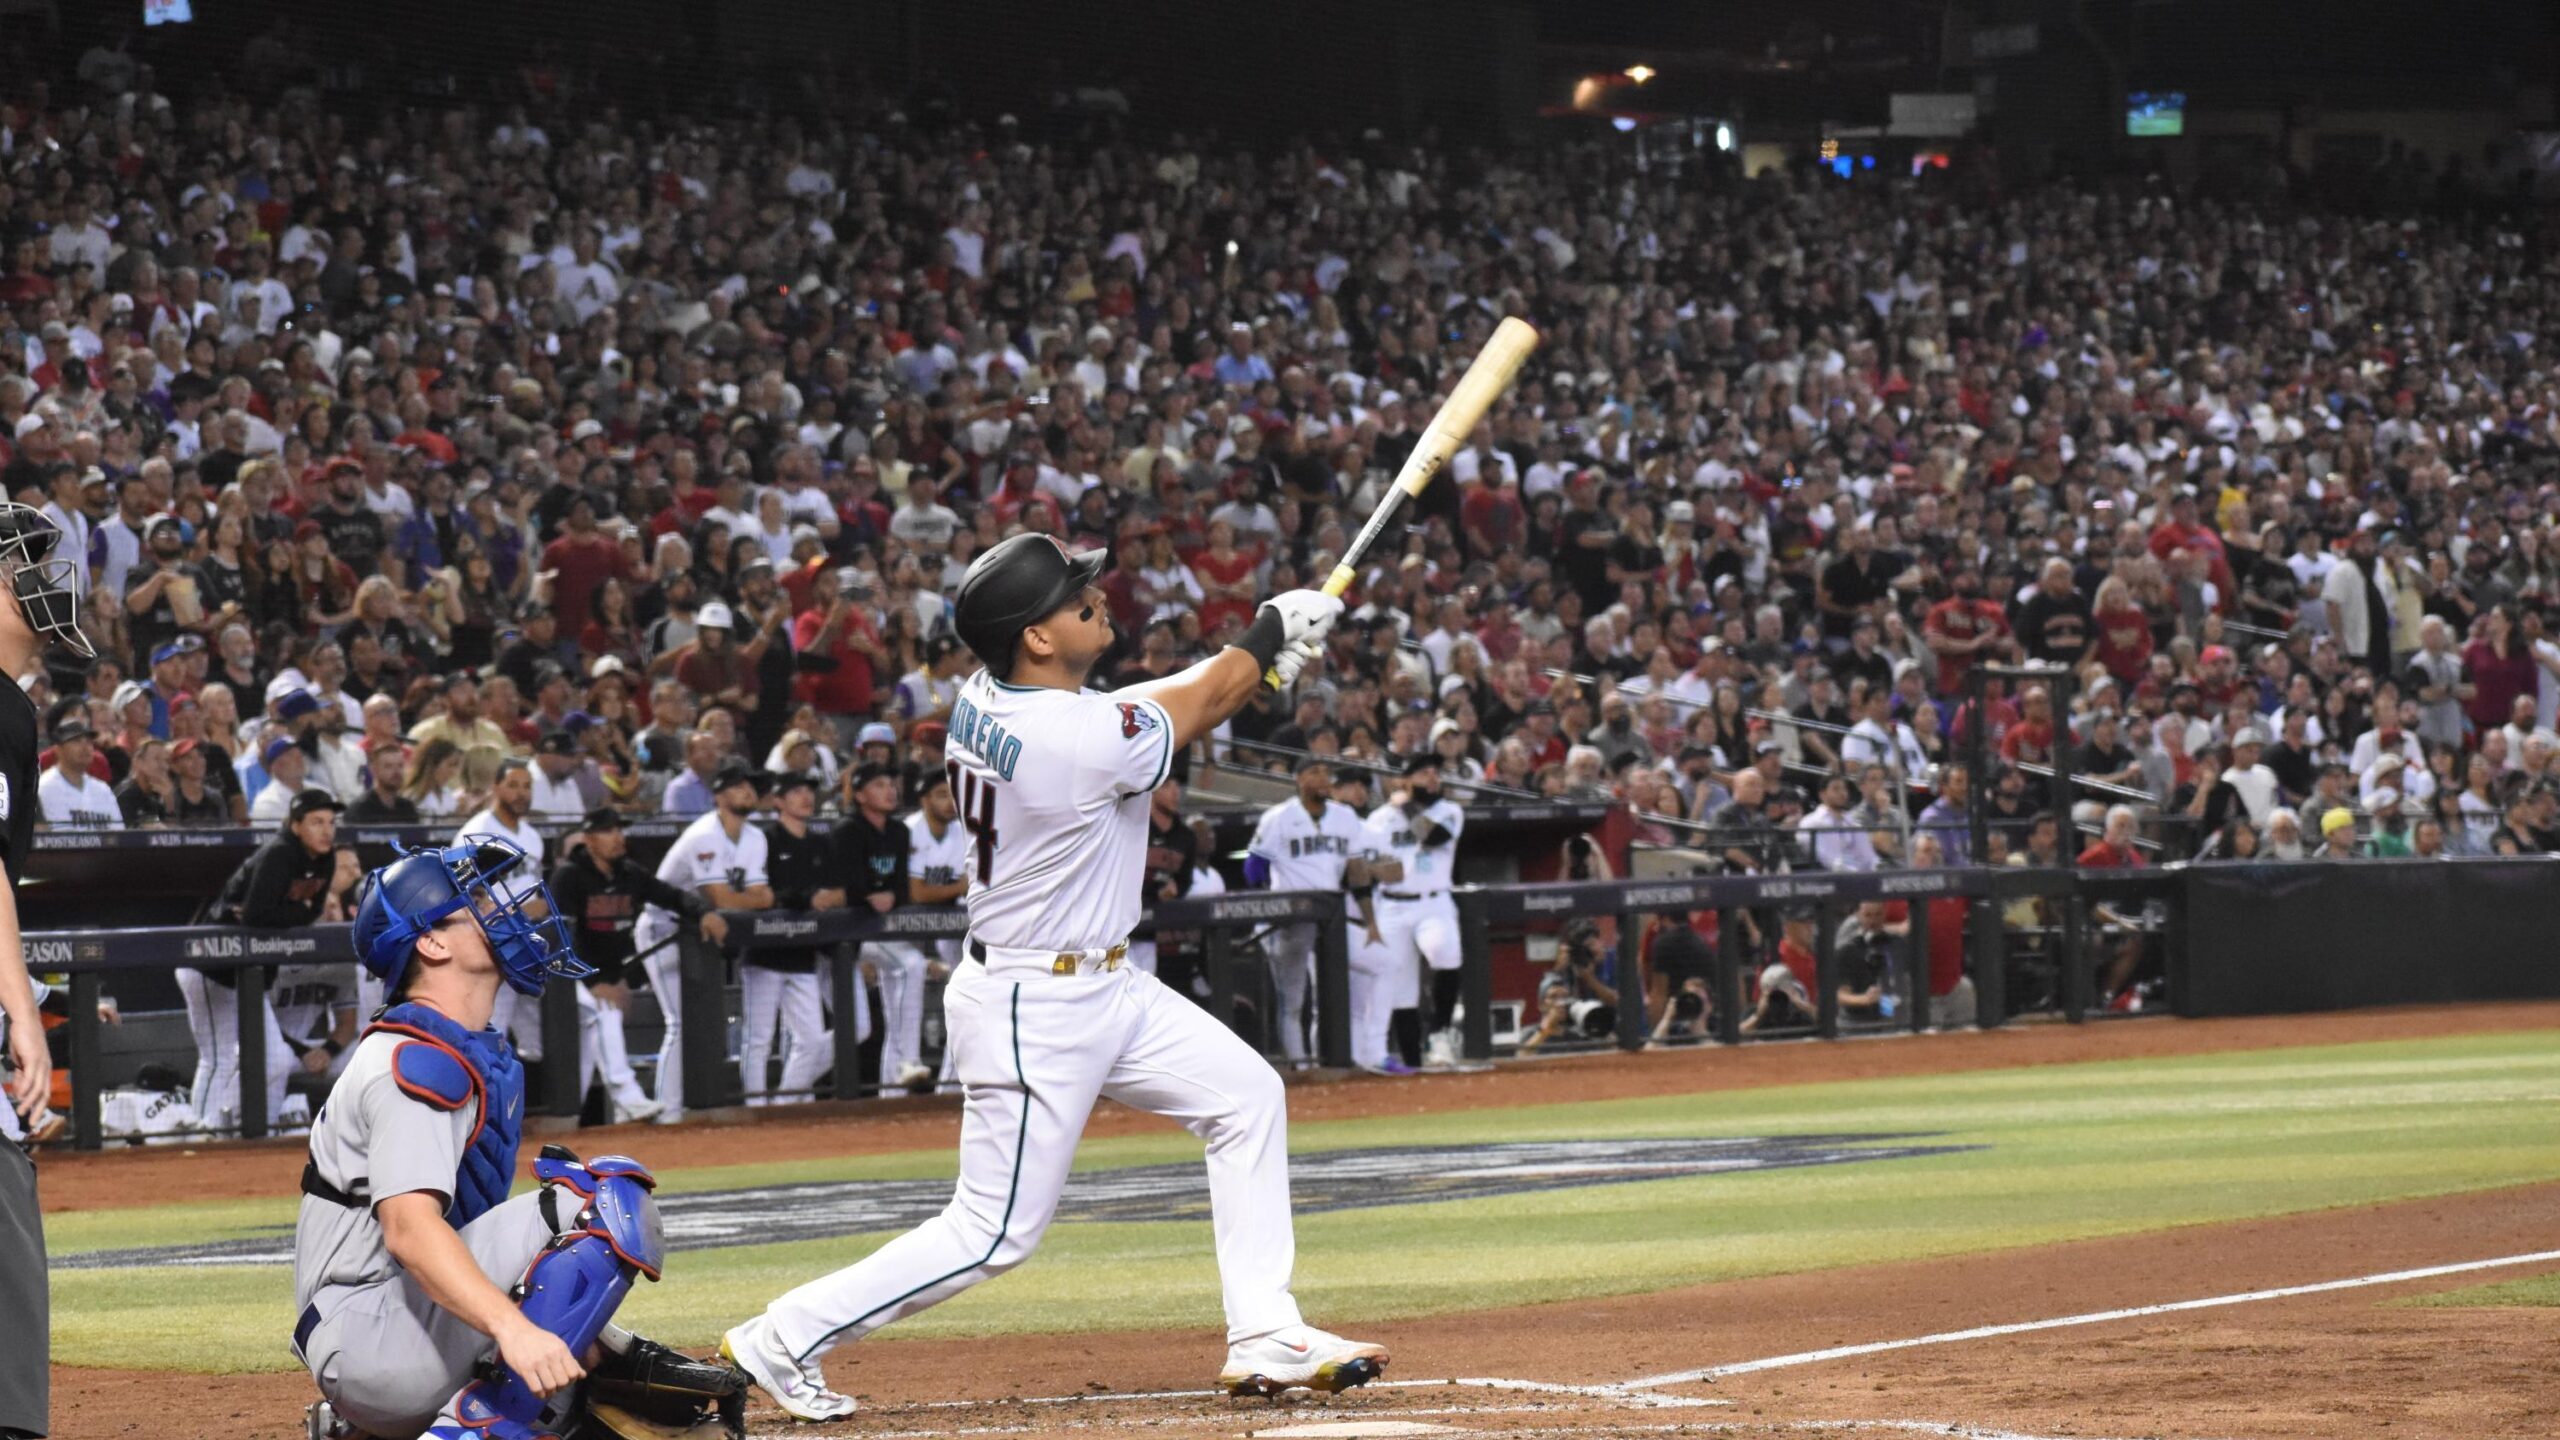 Sedona Red Recap: D-backs edge Astros to close 2015 on a high note